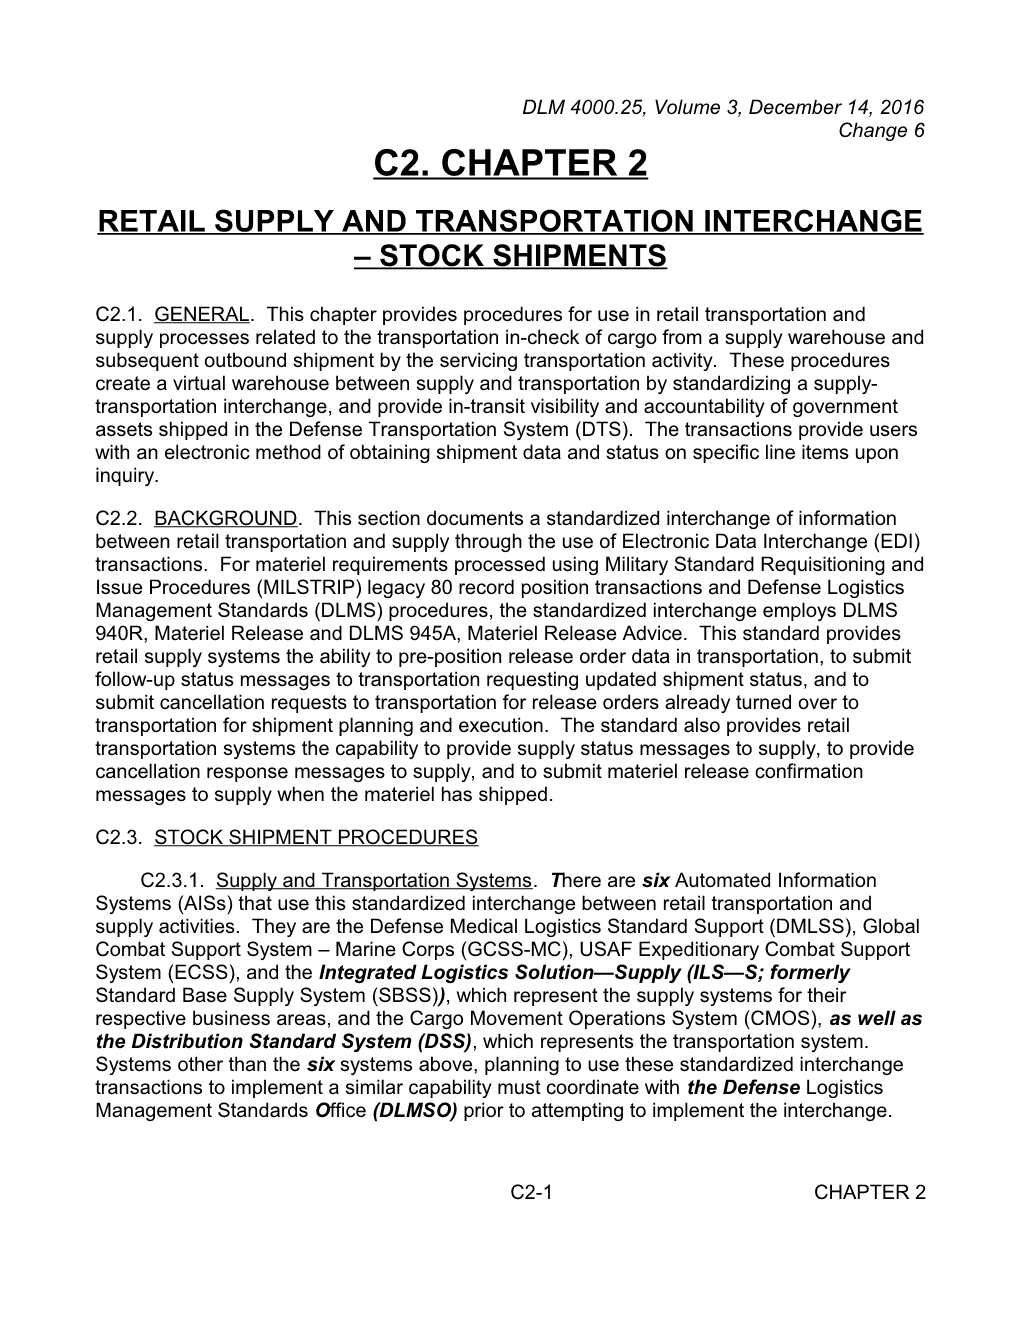 Chapter 2 - Retail Supply and Transportation Interchange-Stock Shipments